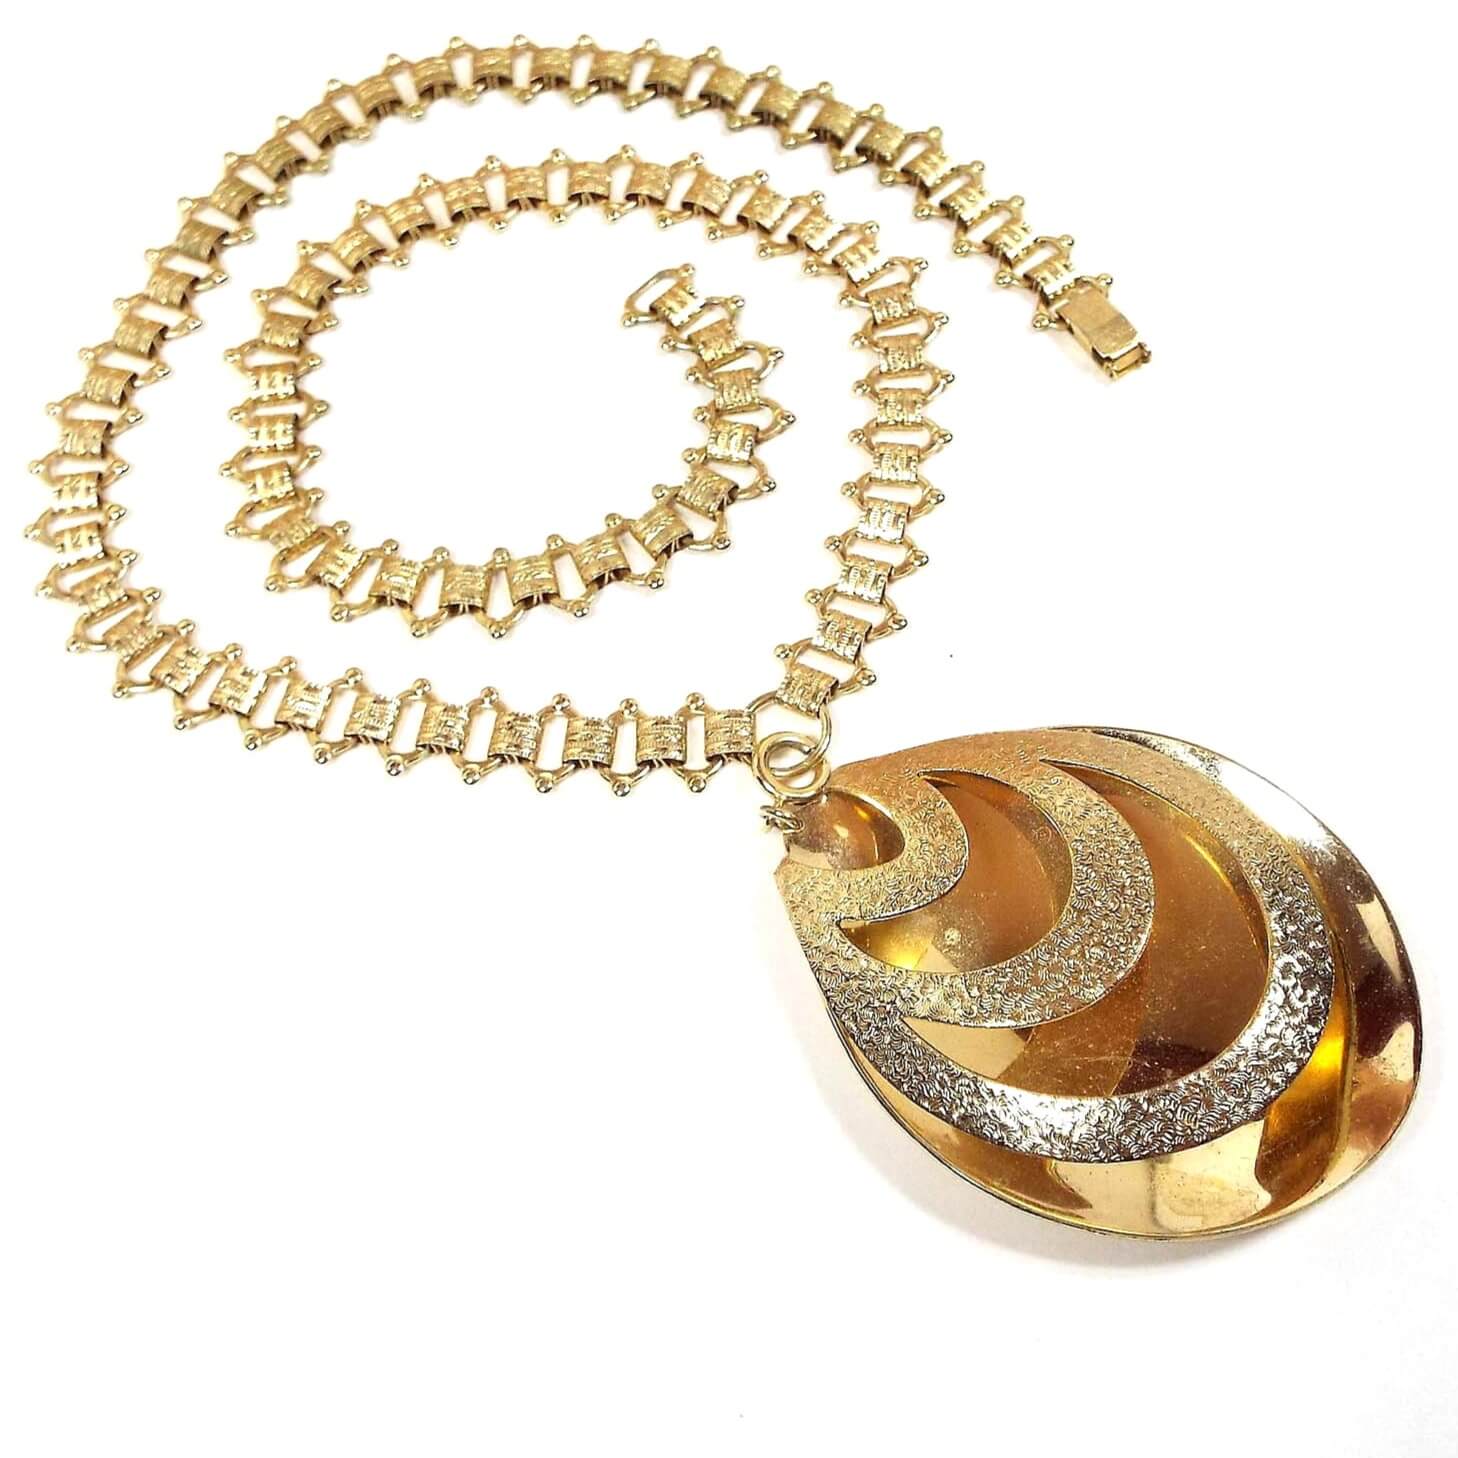 Top view of the Mid Century Vintage Sarah Coventry large teardrop pendant necklace. The chain is gold tone with fancy open links and textured pattern links. There is a snap lock clasp on the end. The pendant is a large teardrop with a cut areas on the front and a spring ring clasp at the top so you can remove it from the chain if you want.